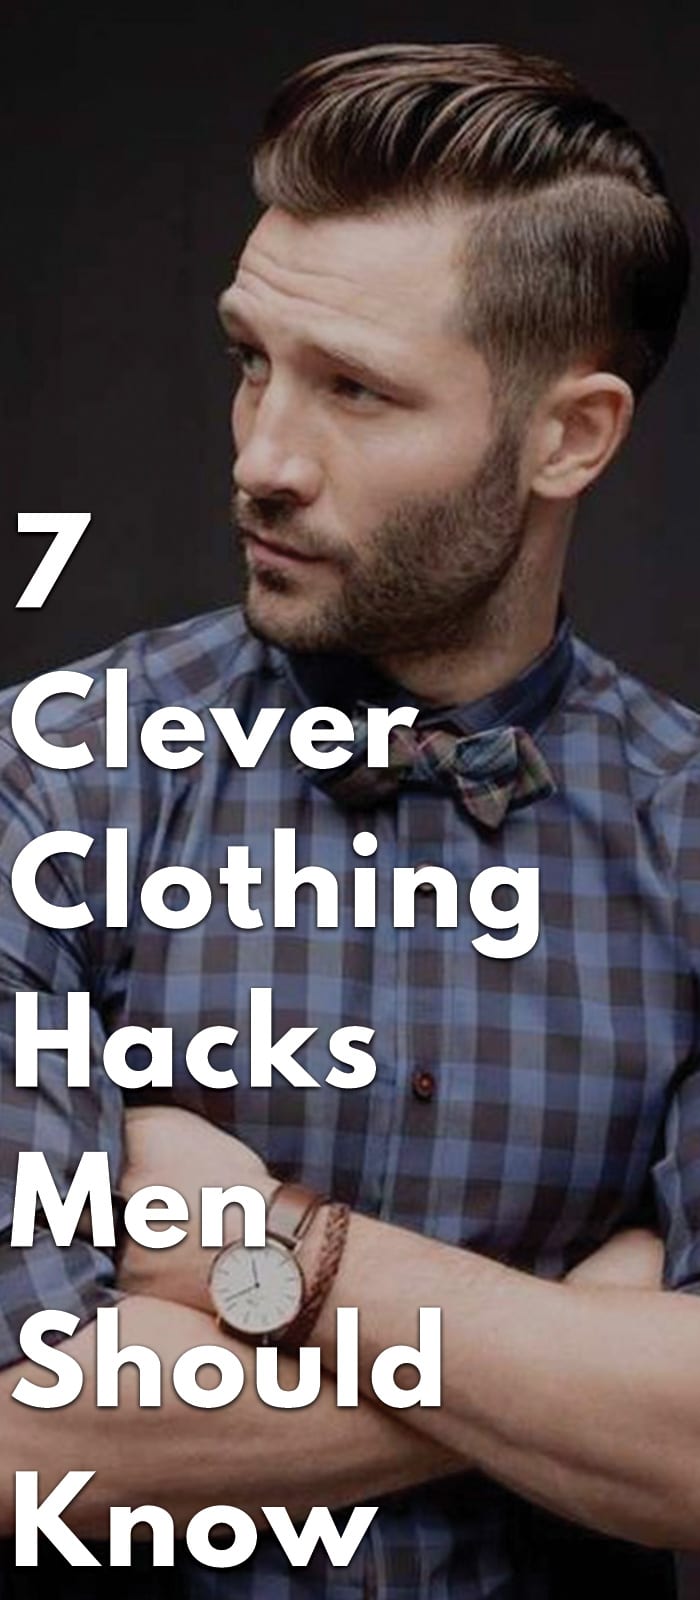 7-Clever-Clothing-Hacks-Men-Should-Know